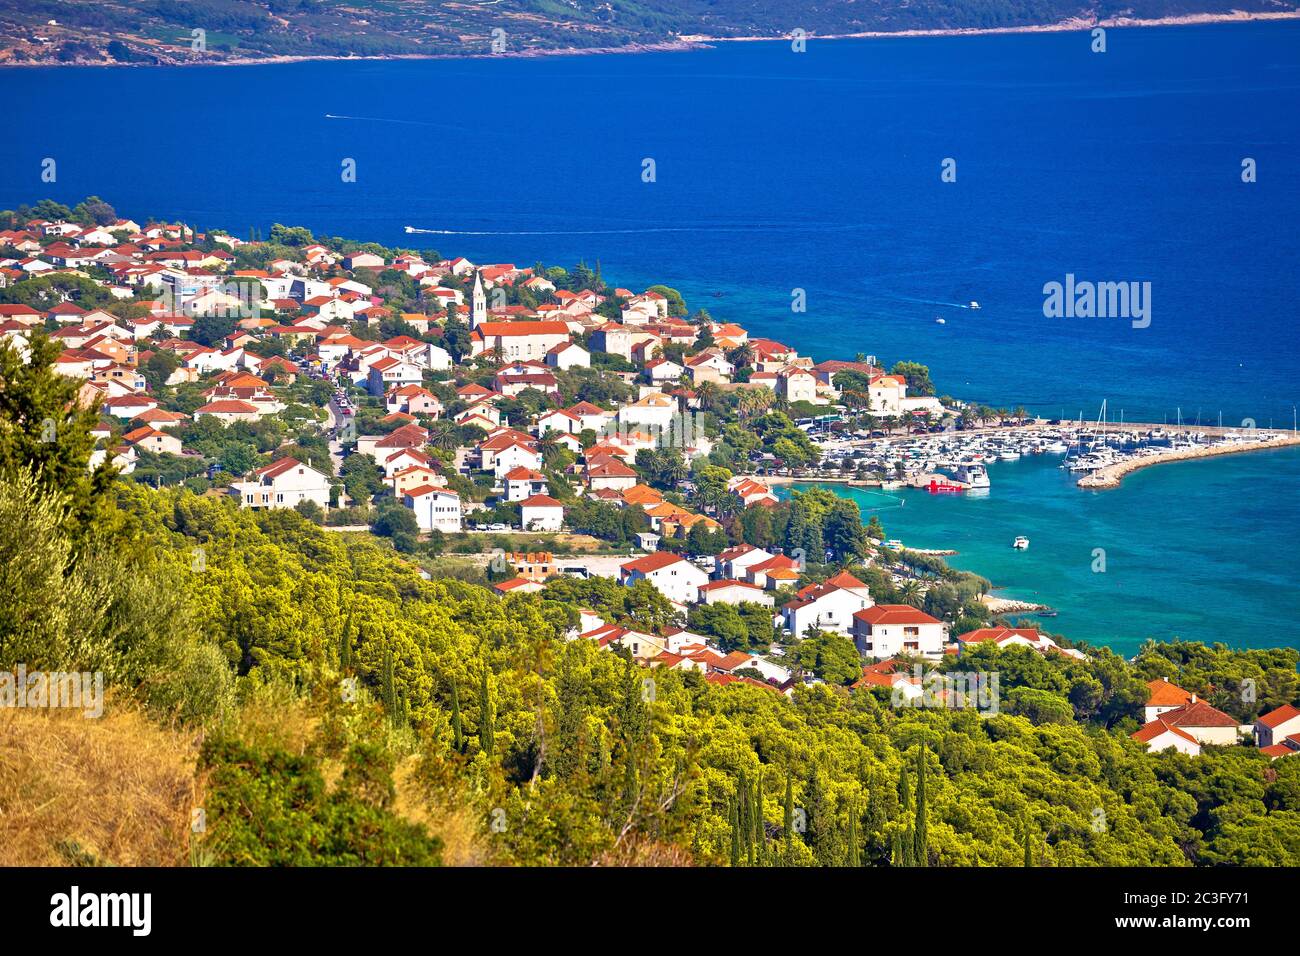 Town of Orebic on Peljesac peninsula view from the hill Stock Photo